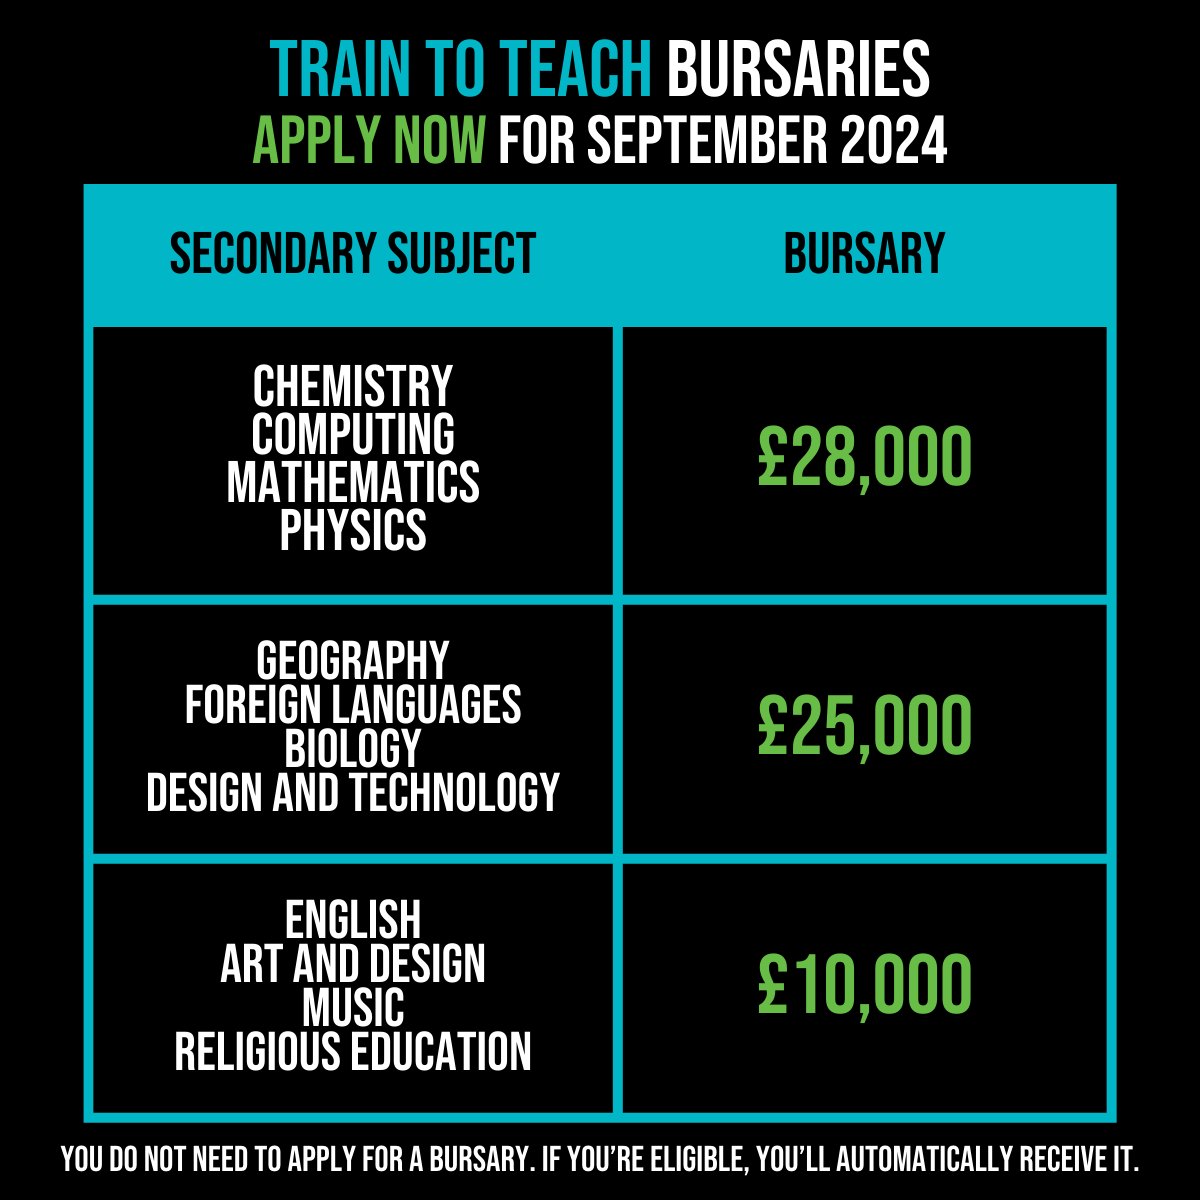 🎓 Don't let finances hold back your teaching dreams! Teacher Training bursaries can support your studies, whether you're a recent grad or changing careers. No application needed – if eligible, funding is automatic! Discover our courses to find out more: bit.ly/3yizhbD